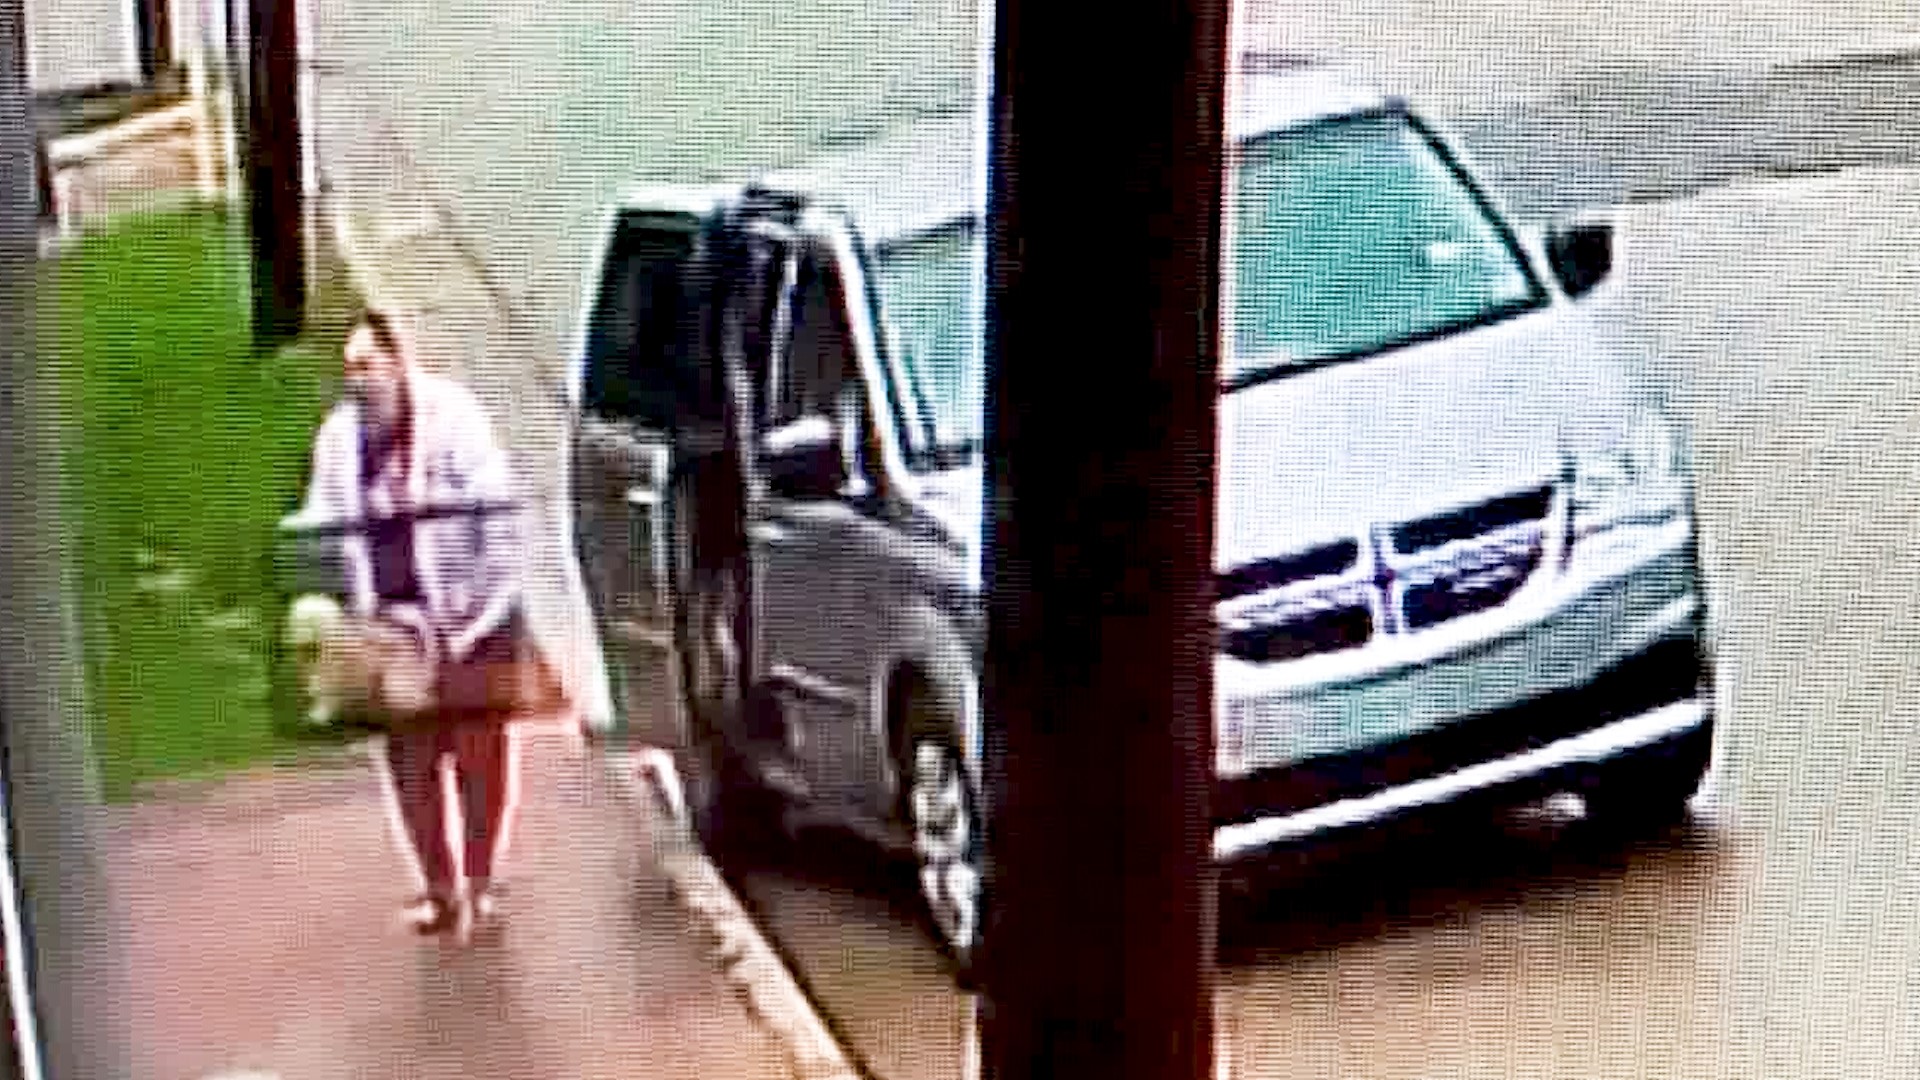 The Humane Society of North Texas shared a video Tuesday showing a woman leaving a dog on the sidewalk on a rainy day.